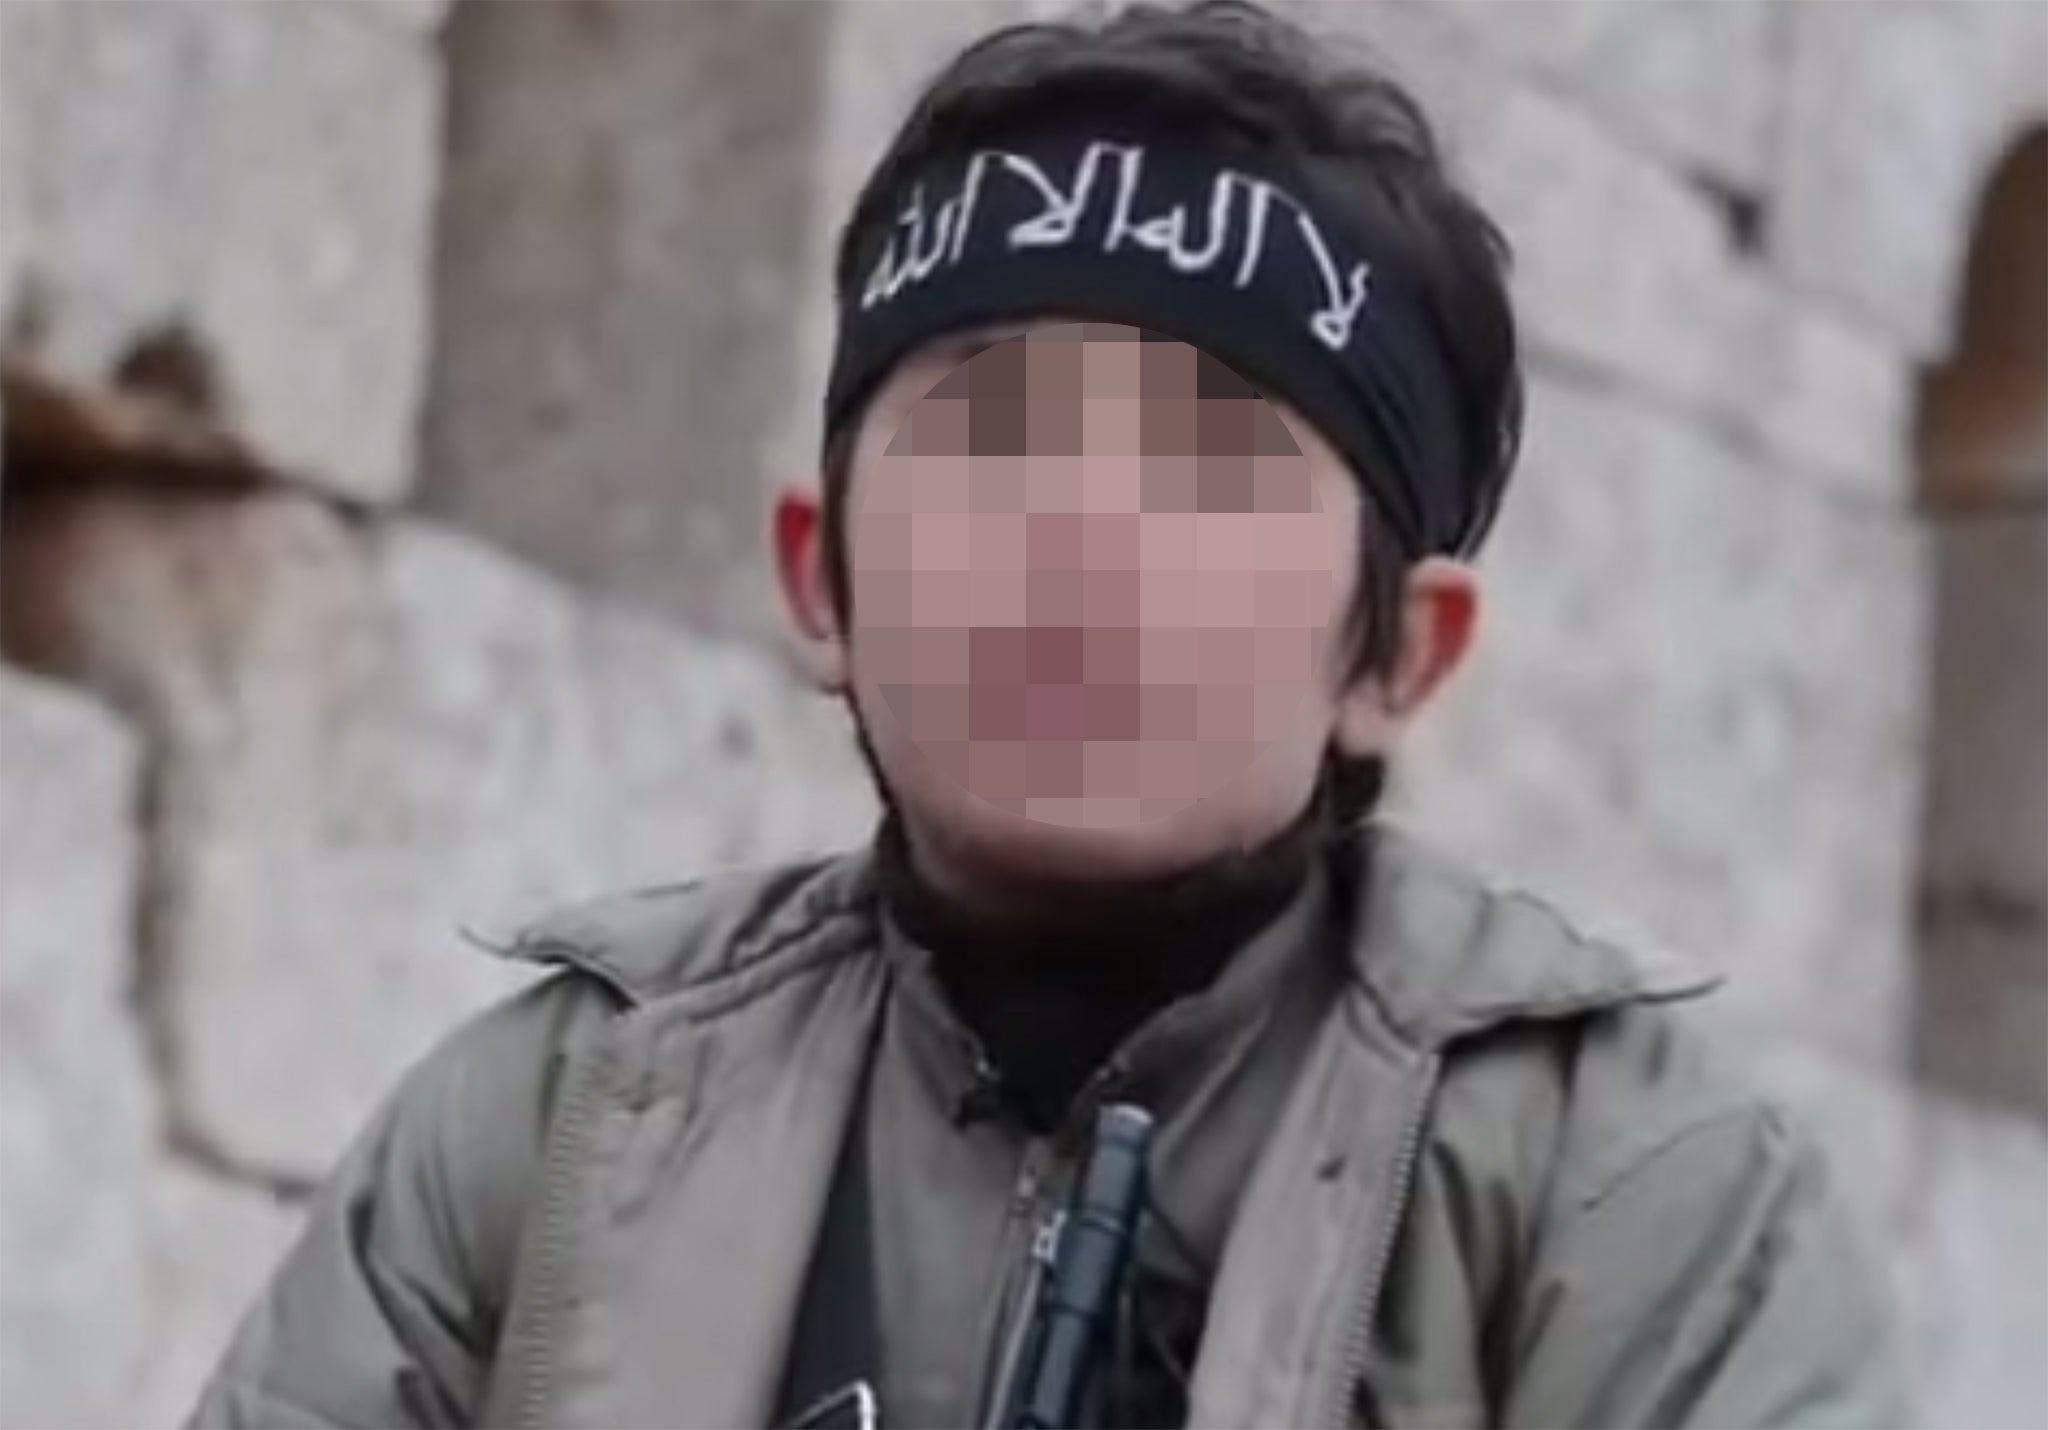 Boys who have fled Isis territories say they are made to watch beheadings, mass executions and torture